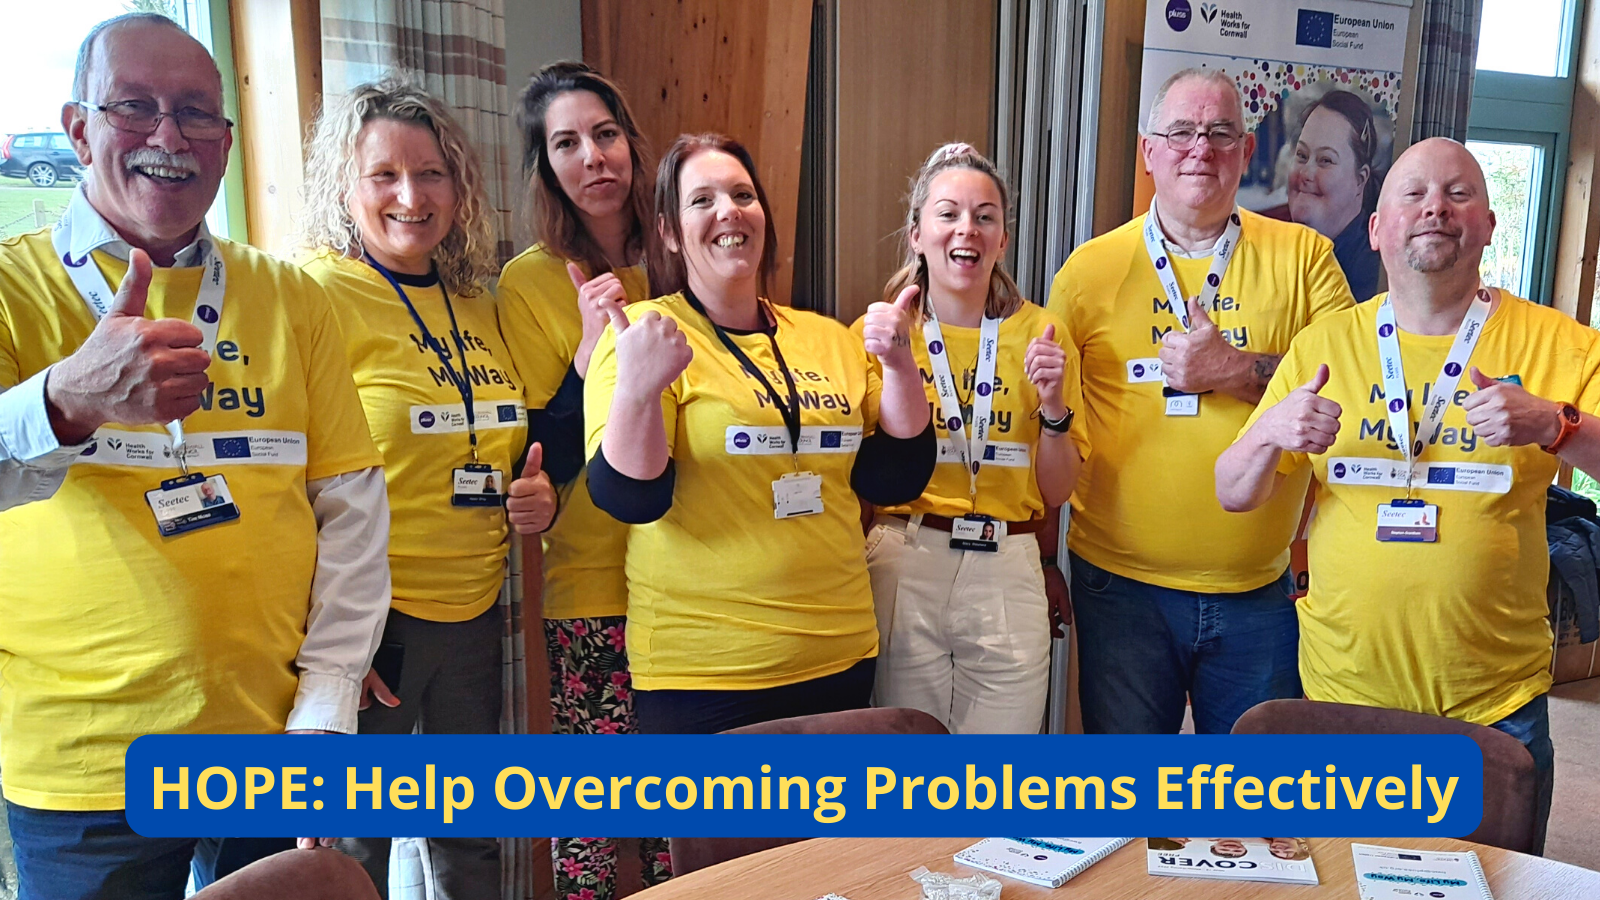 Help Overcoming Problems Effectively